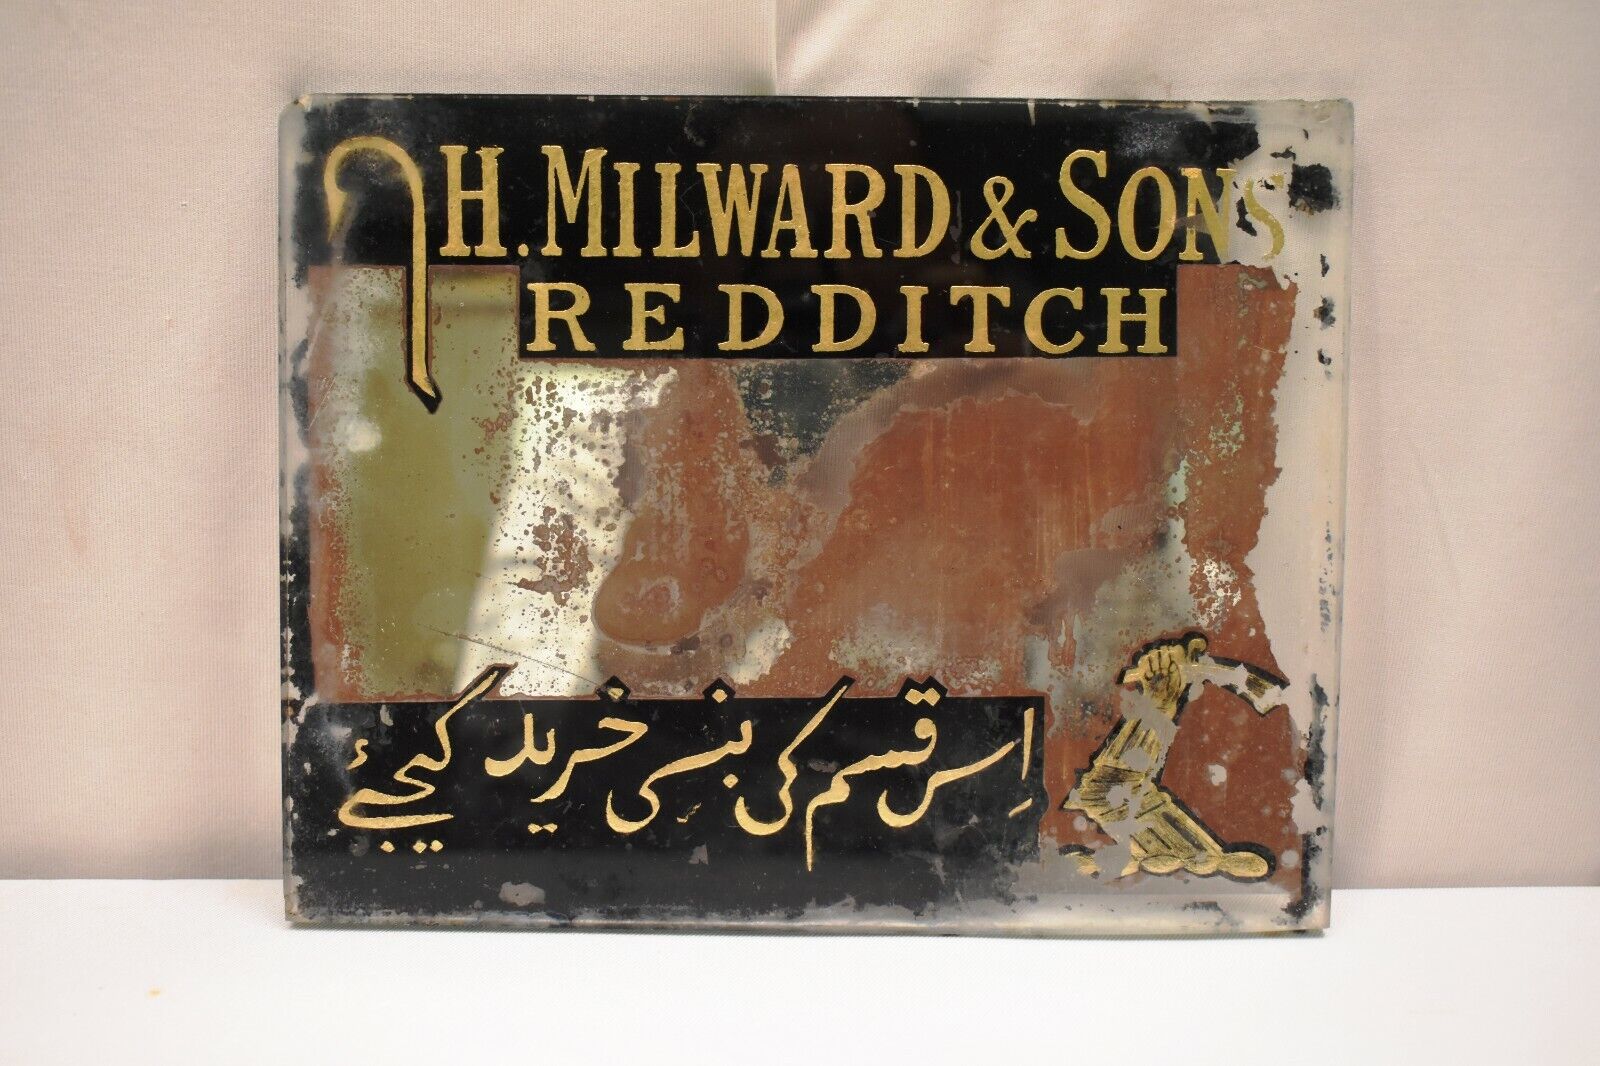 Antique Advertising Mirror H Milward & Sons Redditch Fishing Tackle Hook Sign \